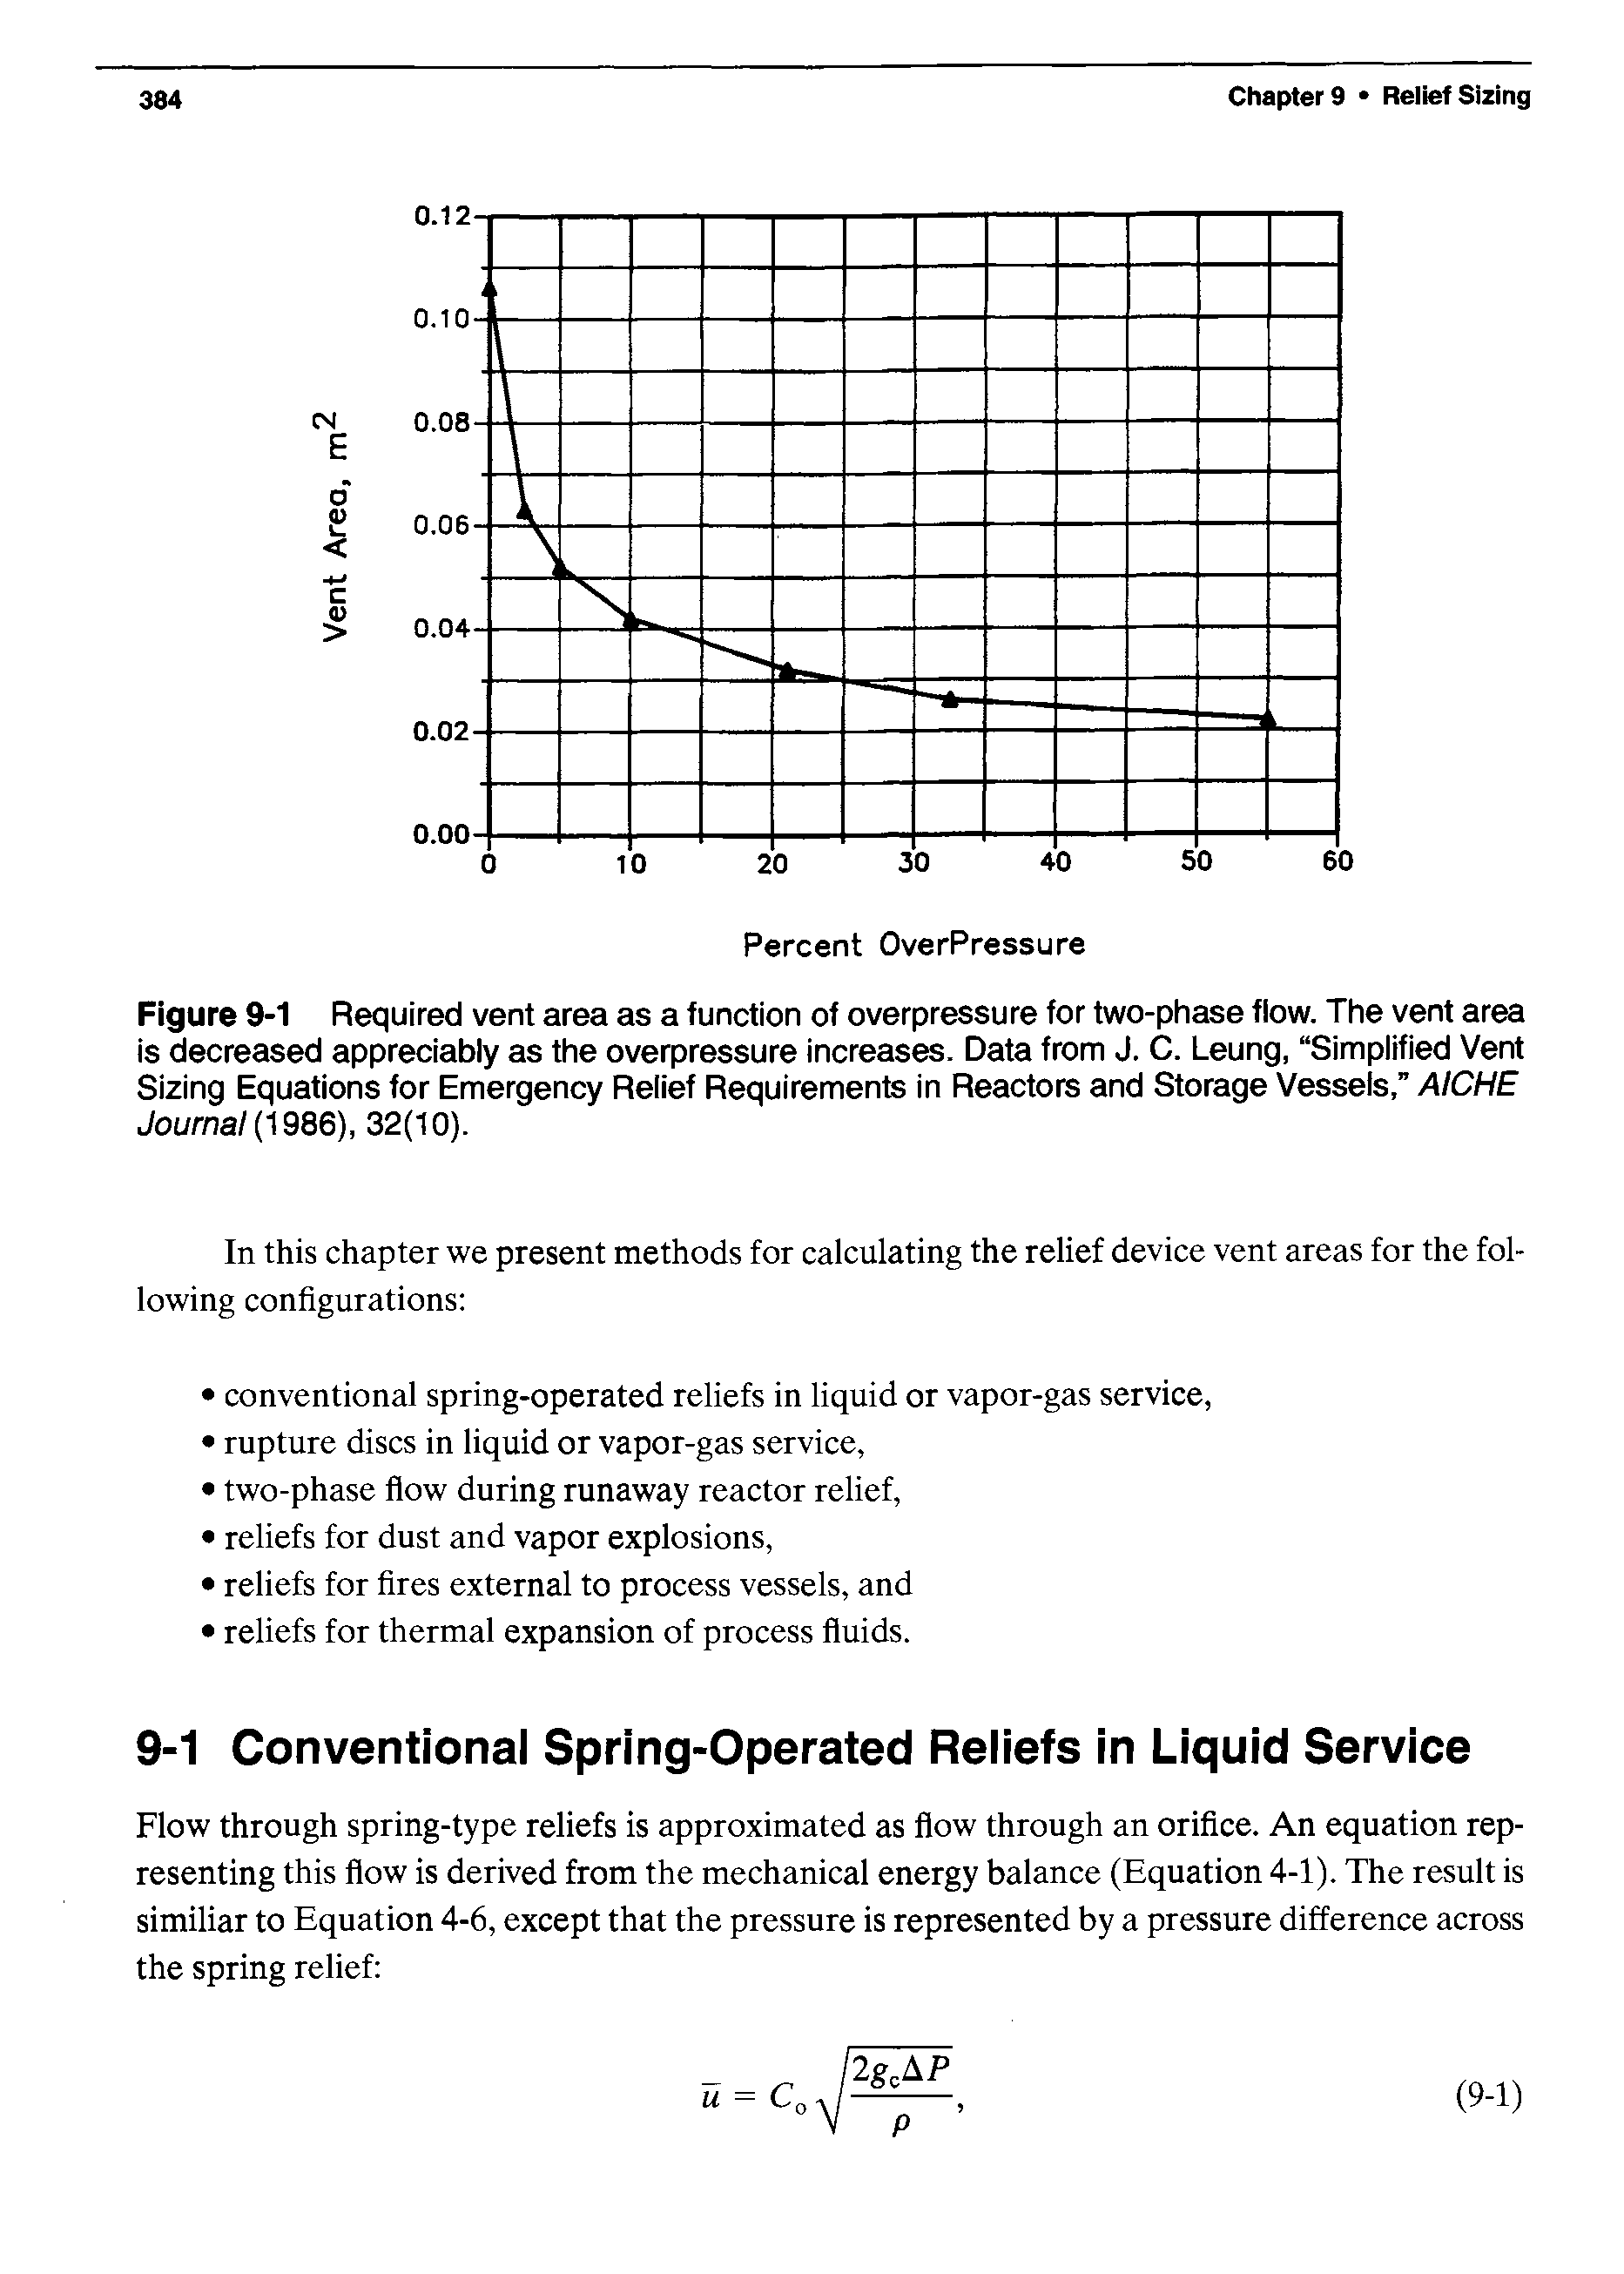 Figure 9-1 Required vent area as a function of overpressure for two-phase flow. The vent area is decreased appreciably as the overpressure increases. Data from J. C. Leung, Simplified Vent Sizing Equations for Emergency Relief Requirements in Reactors and Storage Vessels, AICHE Journal (1986), 32(10).